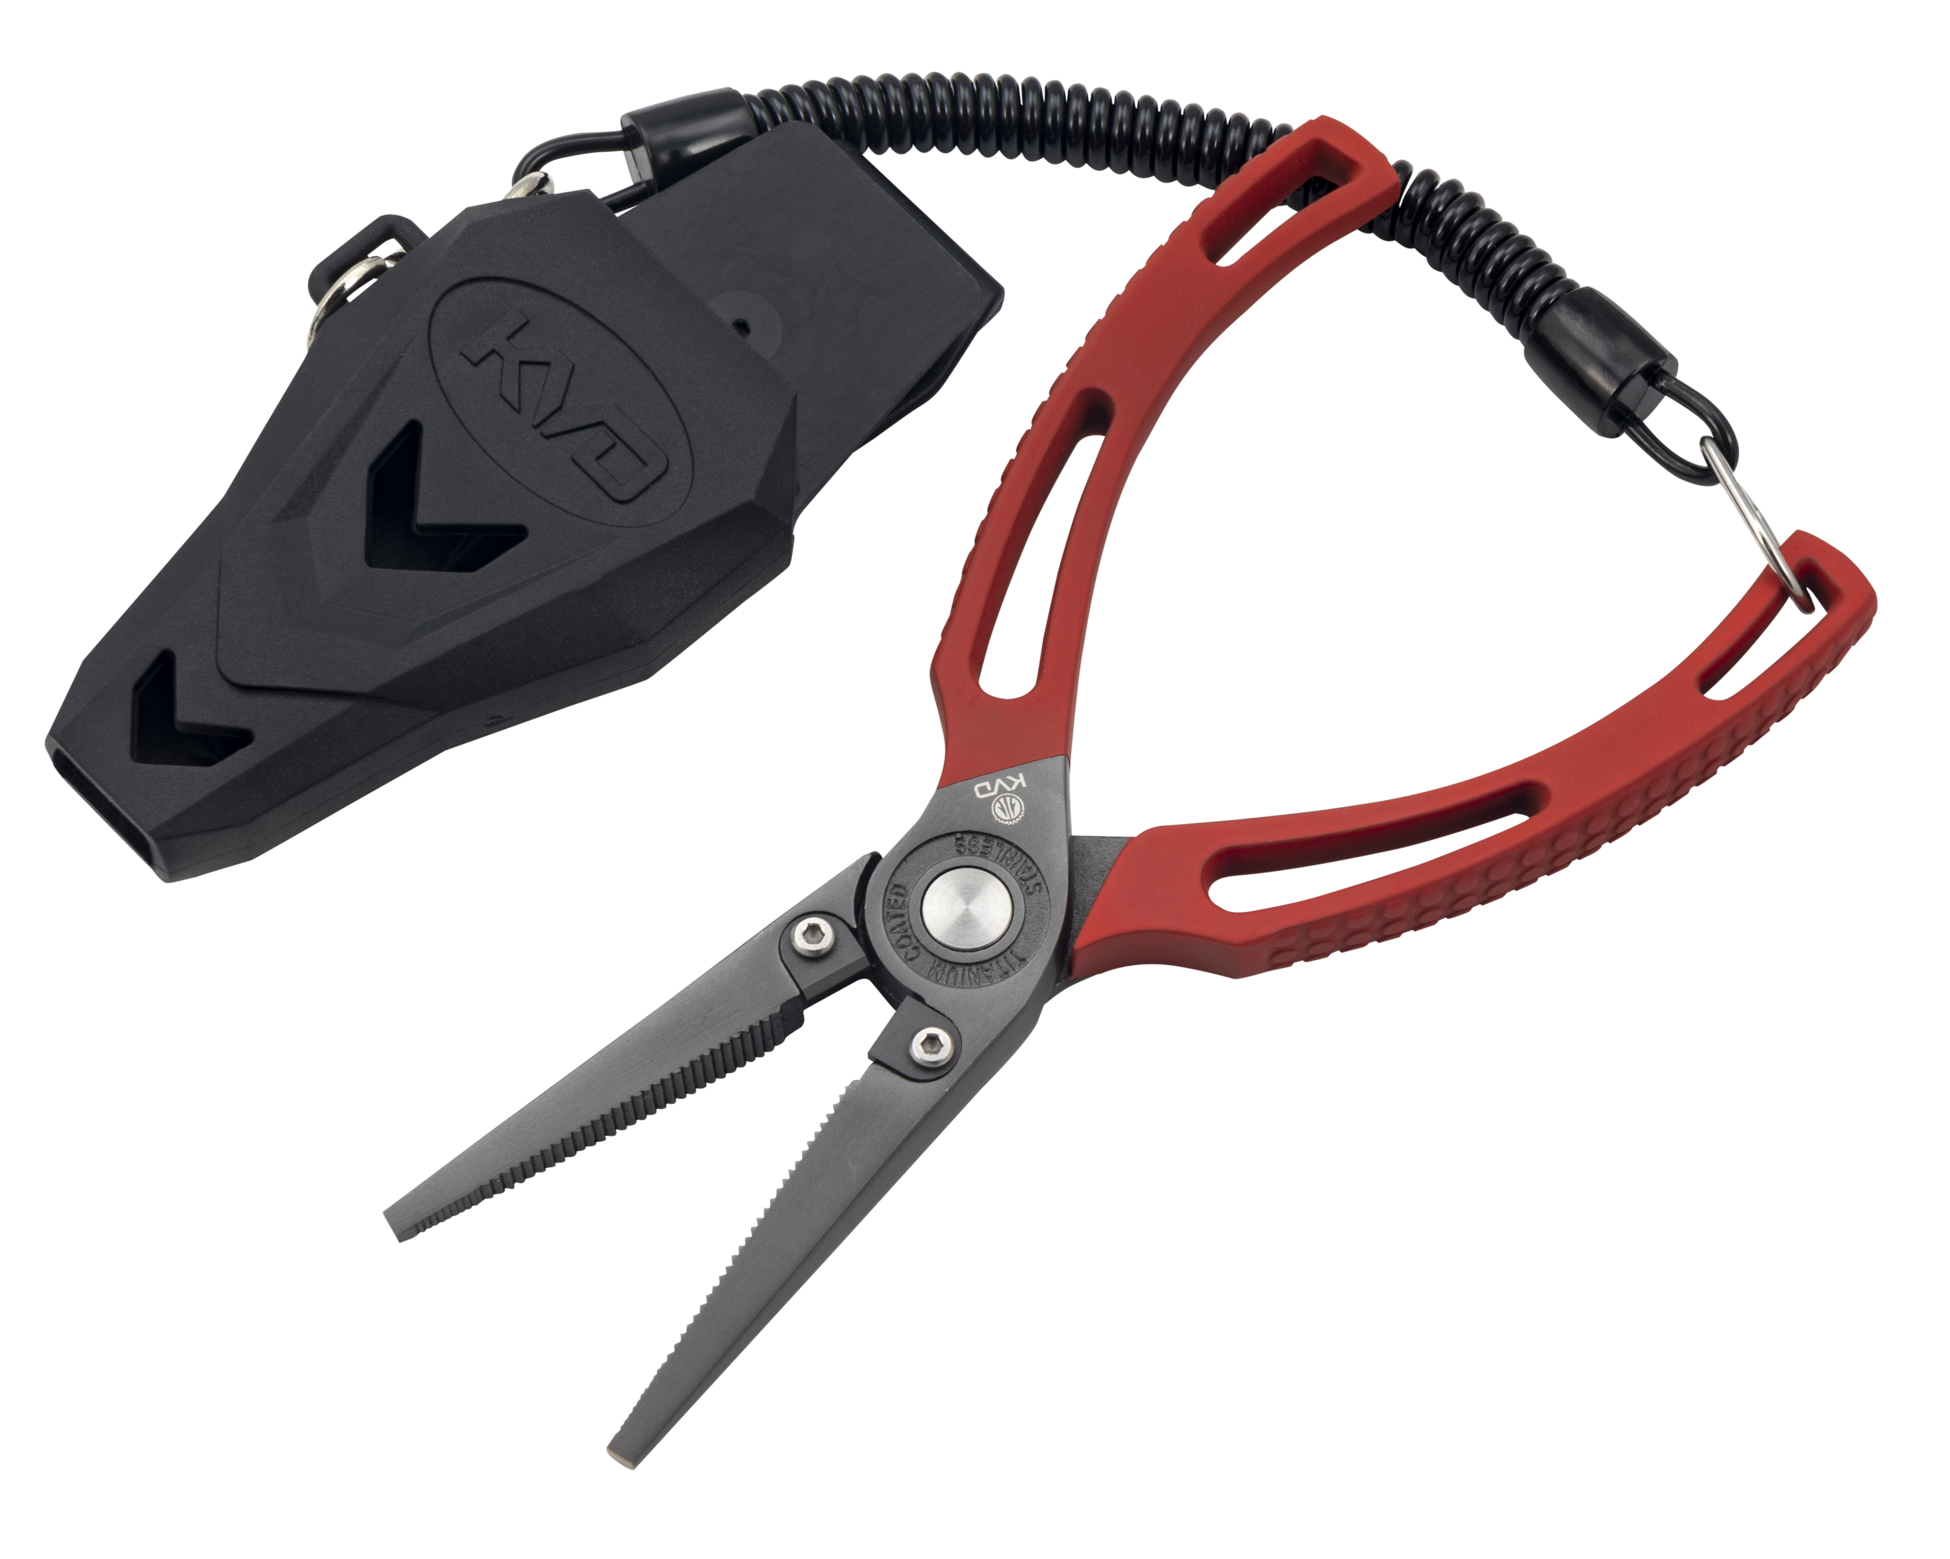 Dr.meter Aluminum Fishing Pliers with Lanyards, Saltwater